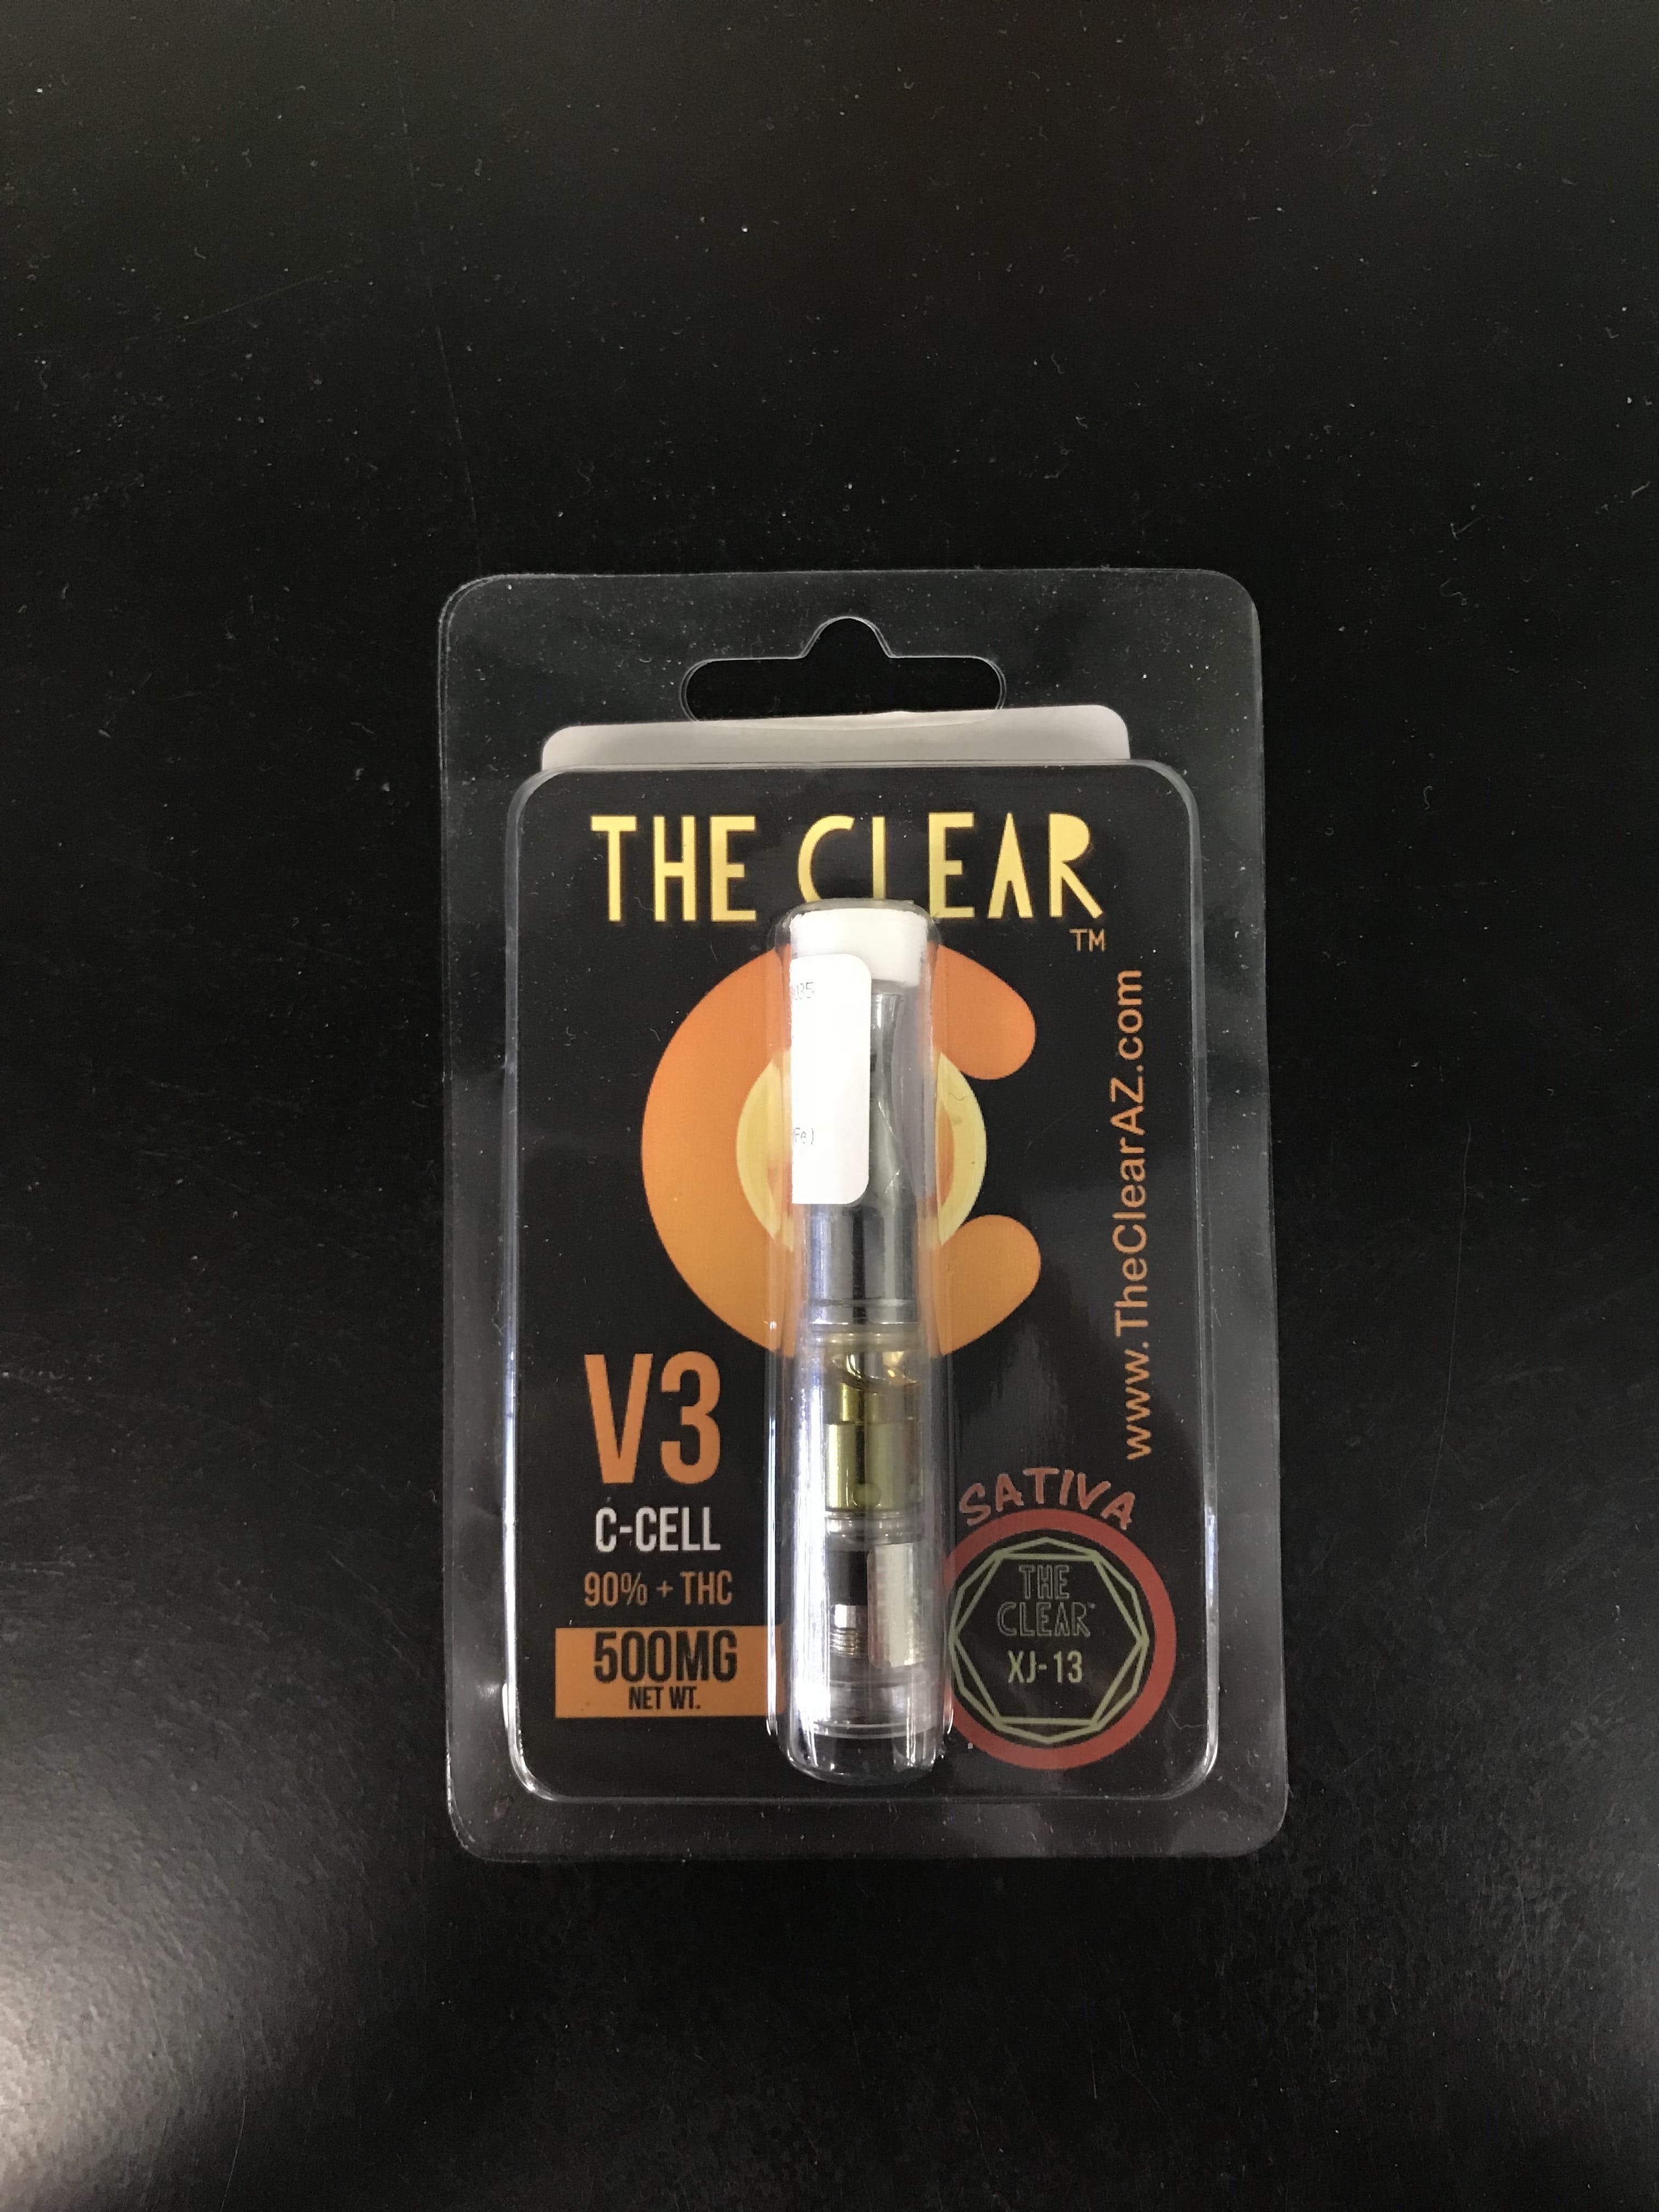 concentrate-the-clear-v3-xj13-500mg-cartridge